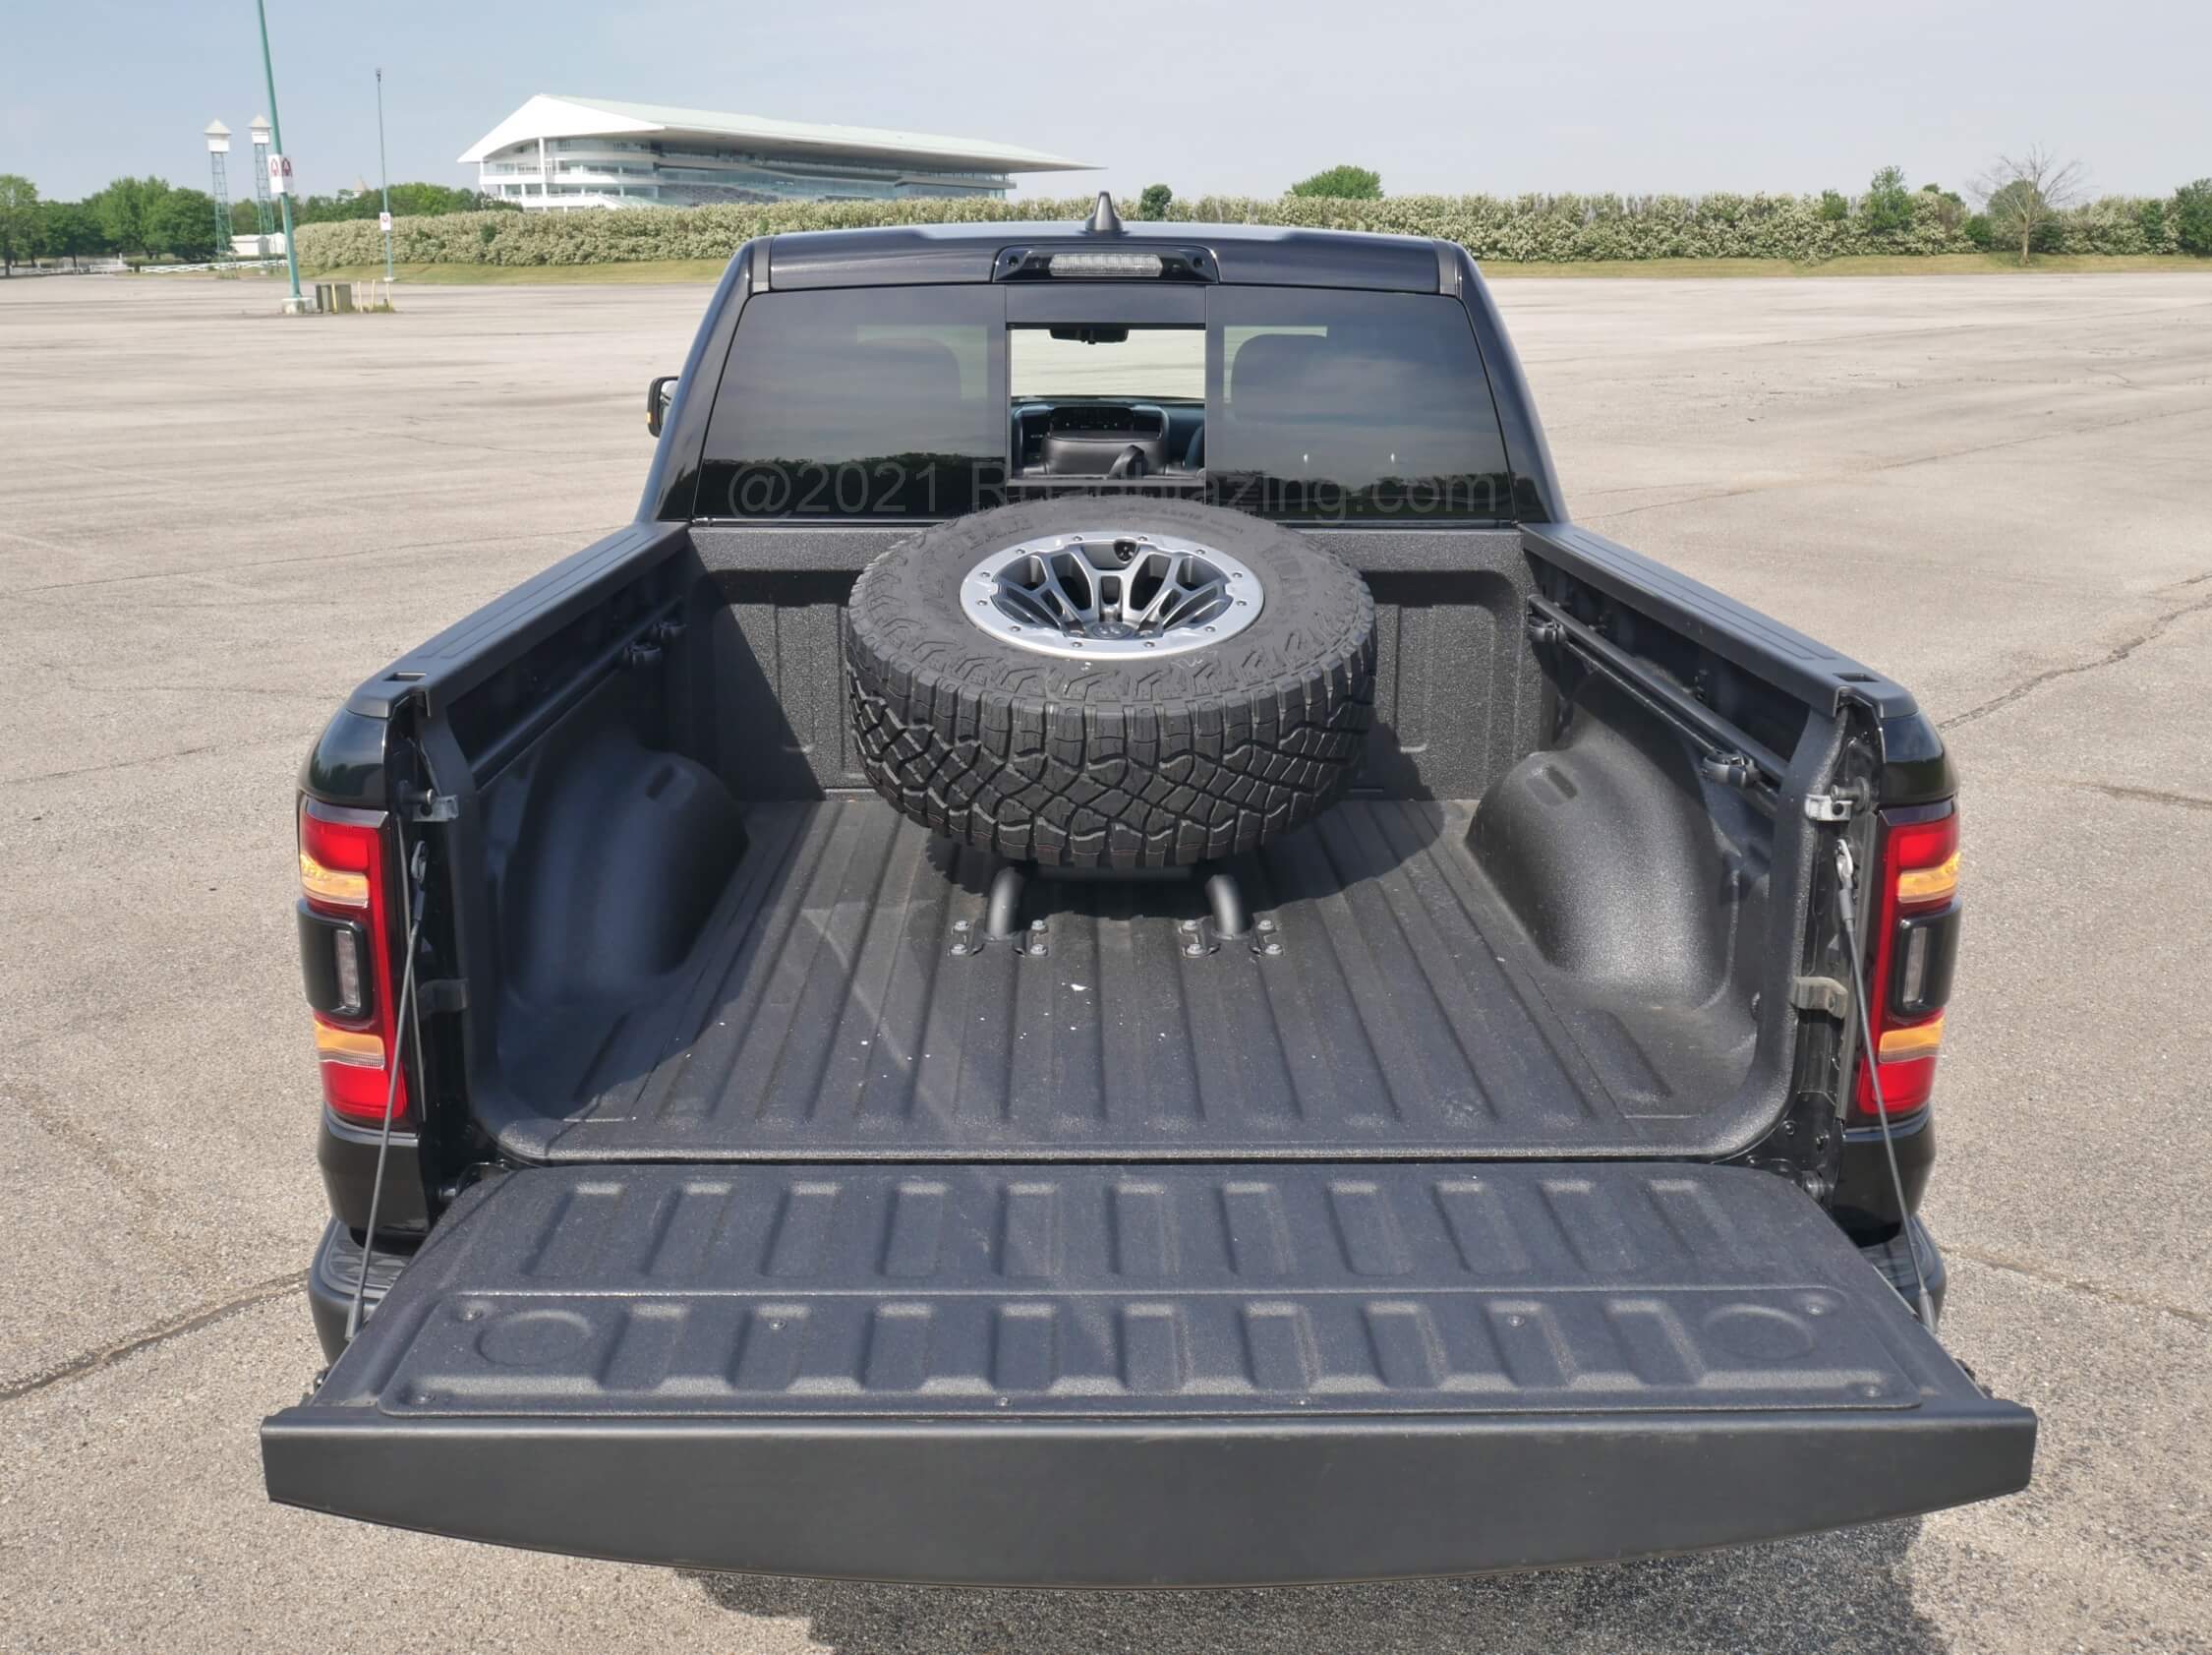 2021 RAM 1500 TRX Crew Cab 4x4: 5.5 ft box with spray-in liner overtaken by full size spare tire + wheel